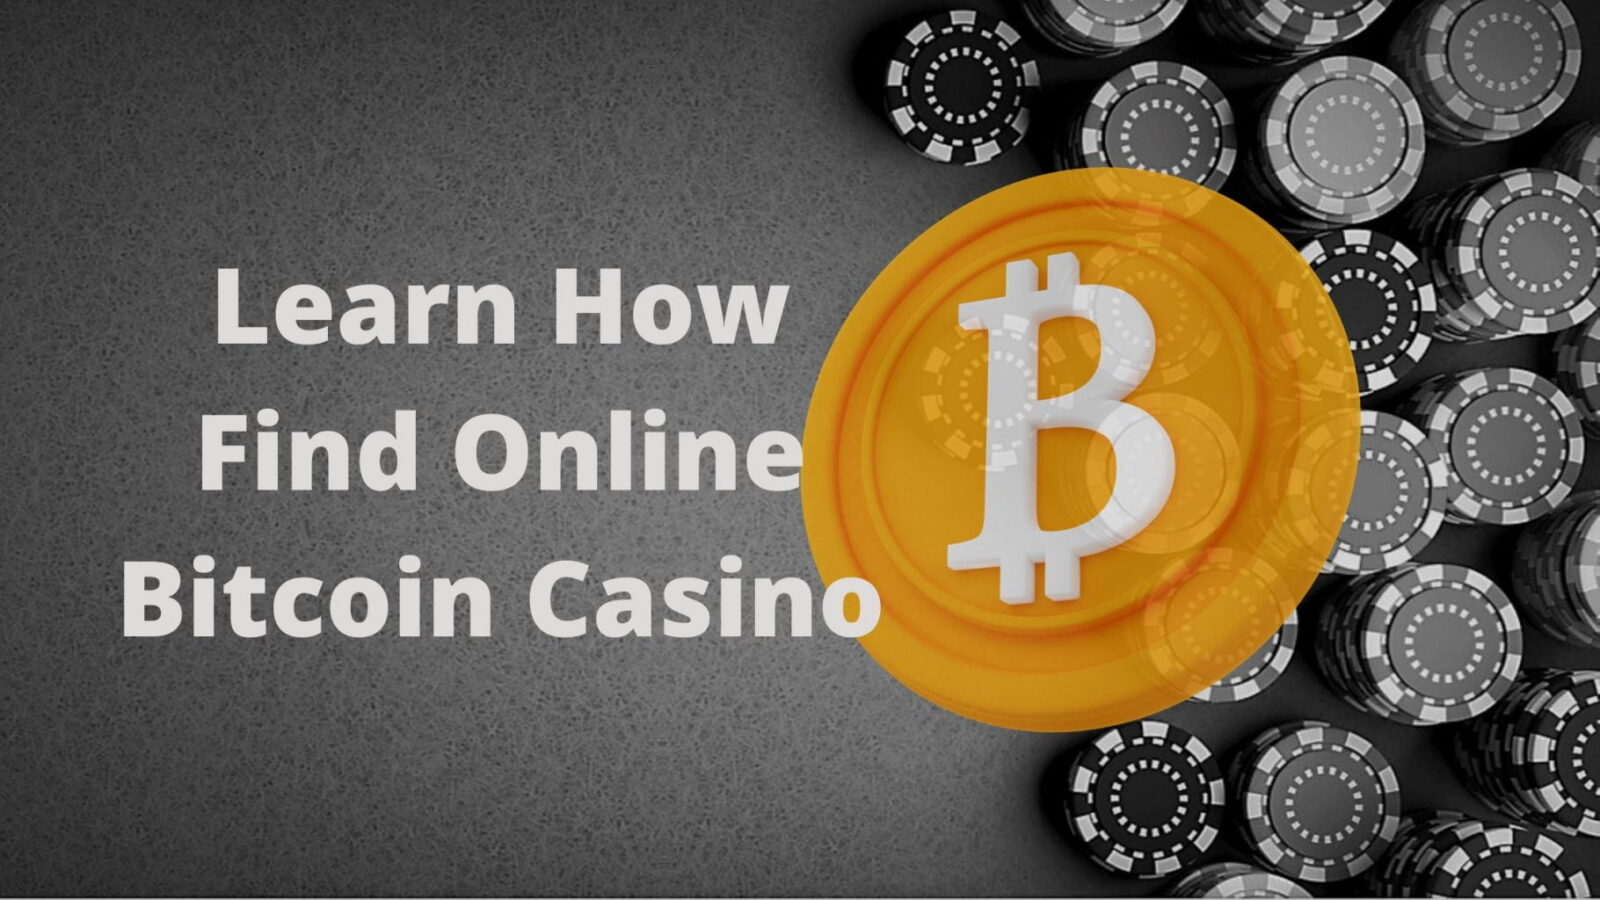 Did You Start best bitcoin casino For Passion or Money?